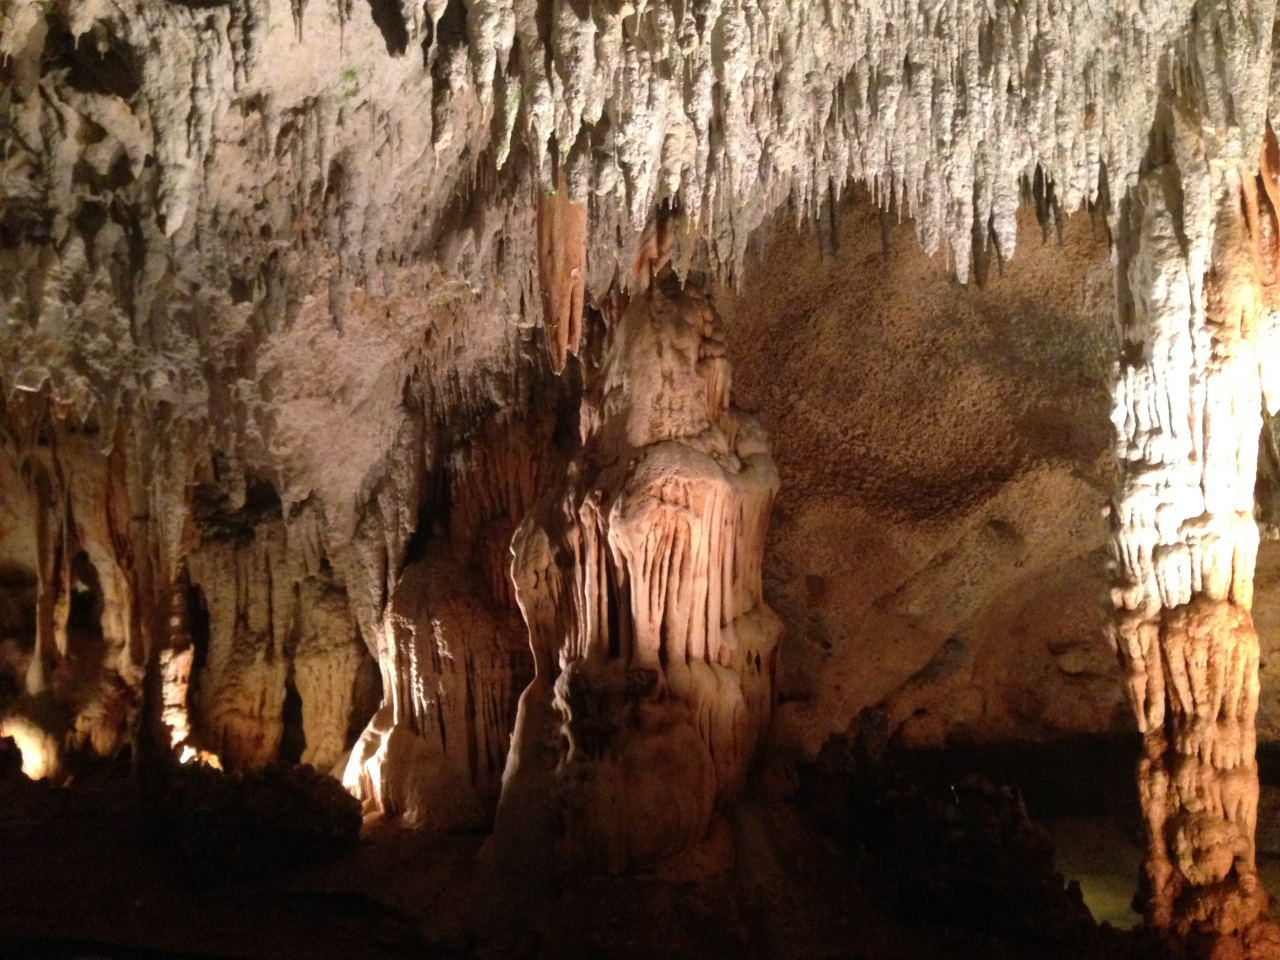 “Cueva de las Maravillas”, the Cave of Wonders, is one of the best places to visit in the Dominican Republic in 3 days